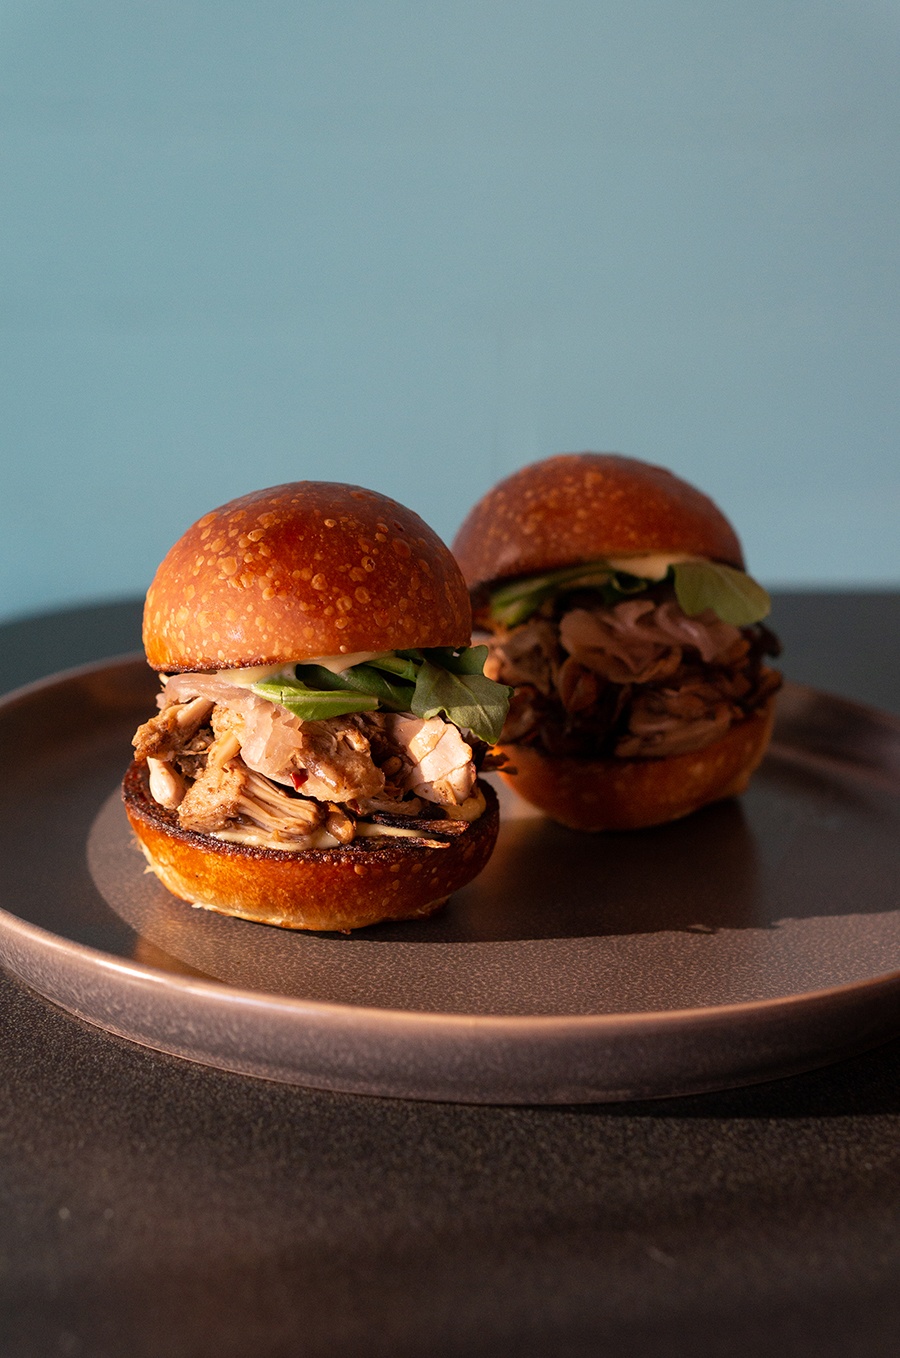 Two sliders sit on a plate, filled with a pulled meat substitute and arugula.